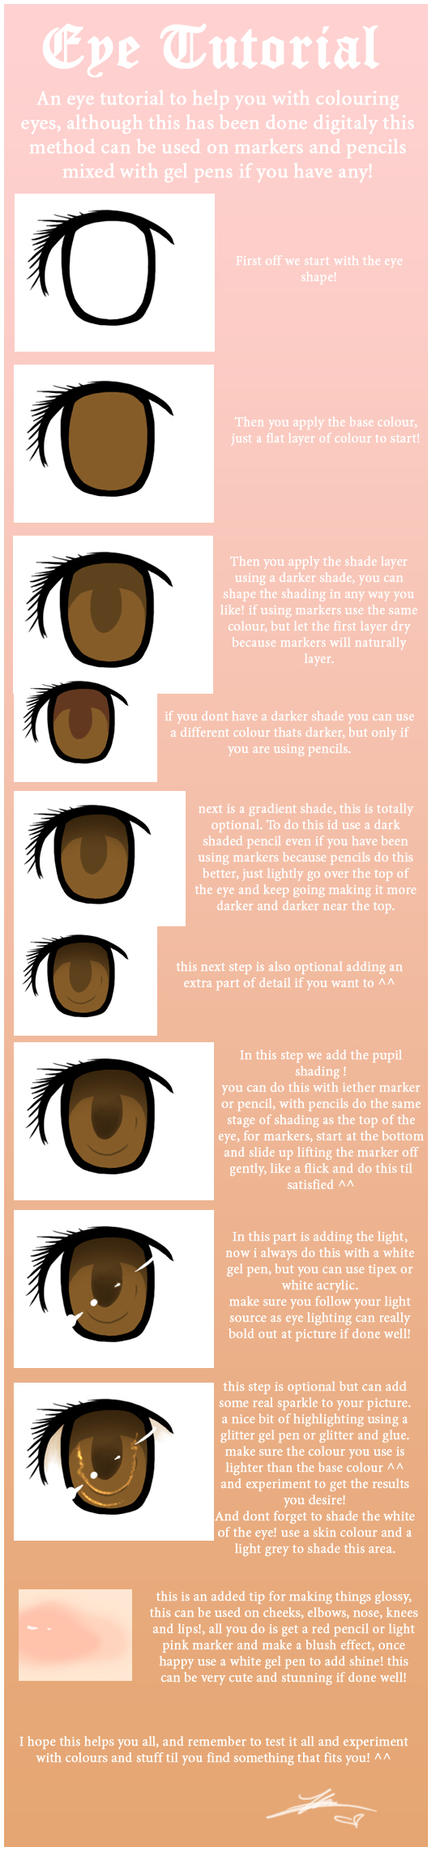 Anime Eye Colouring Tutorial by Chiichanny on DeviantArt